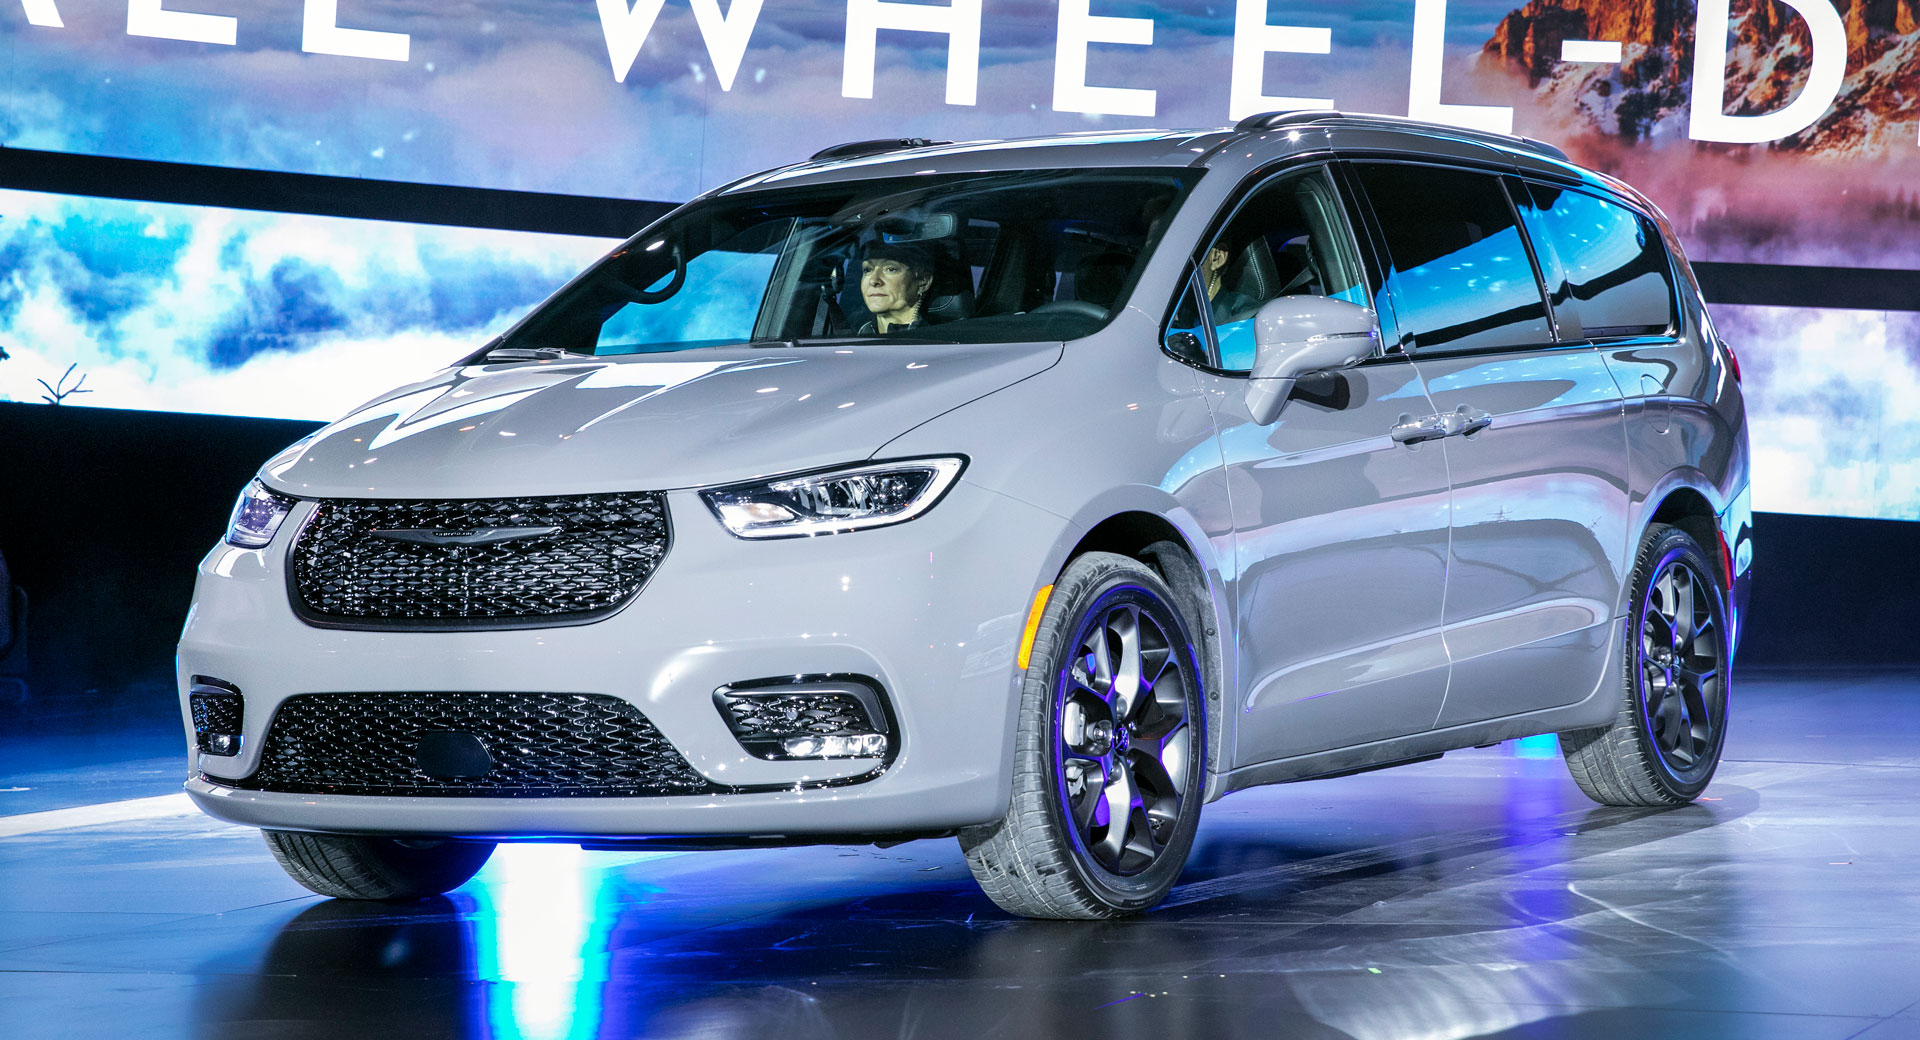 2021 Chrysler Pacifica wants to be more like a utility vehicle